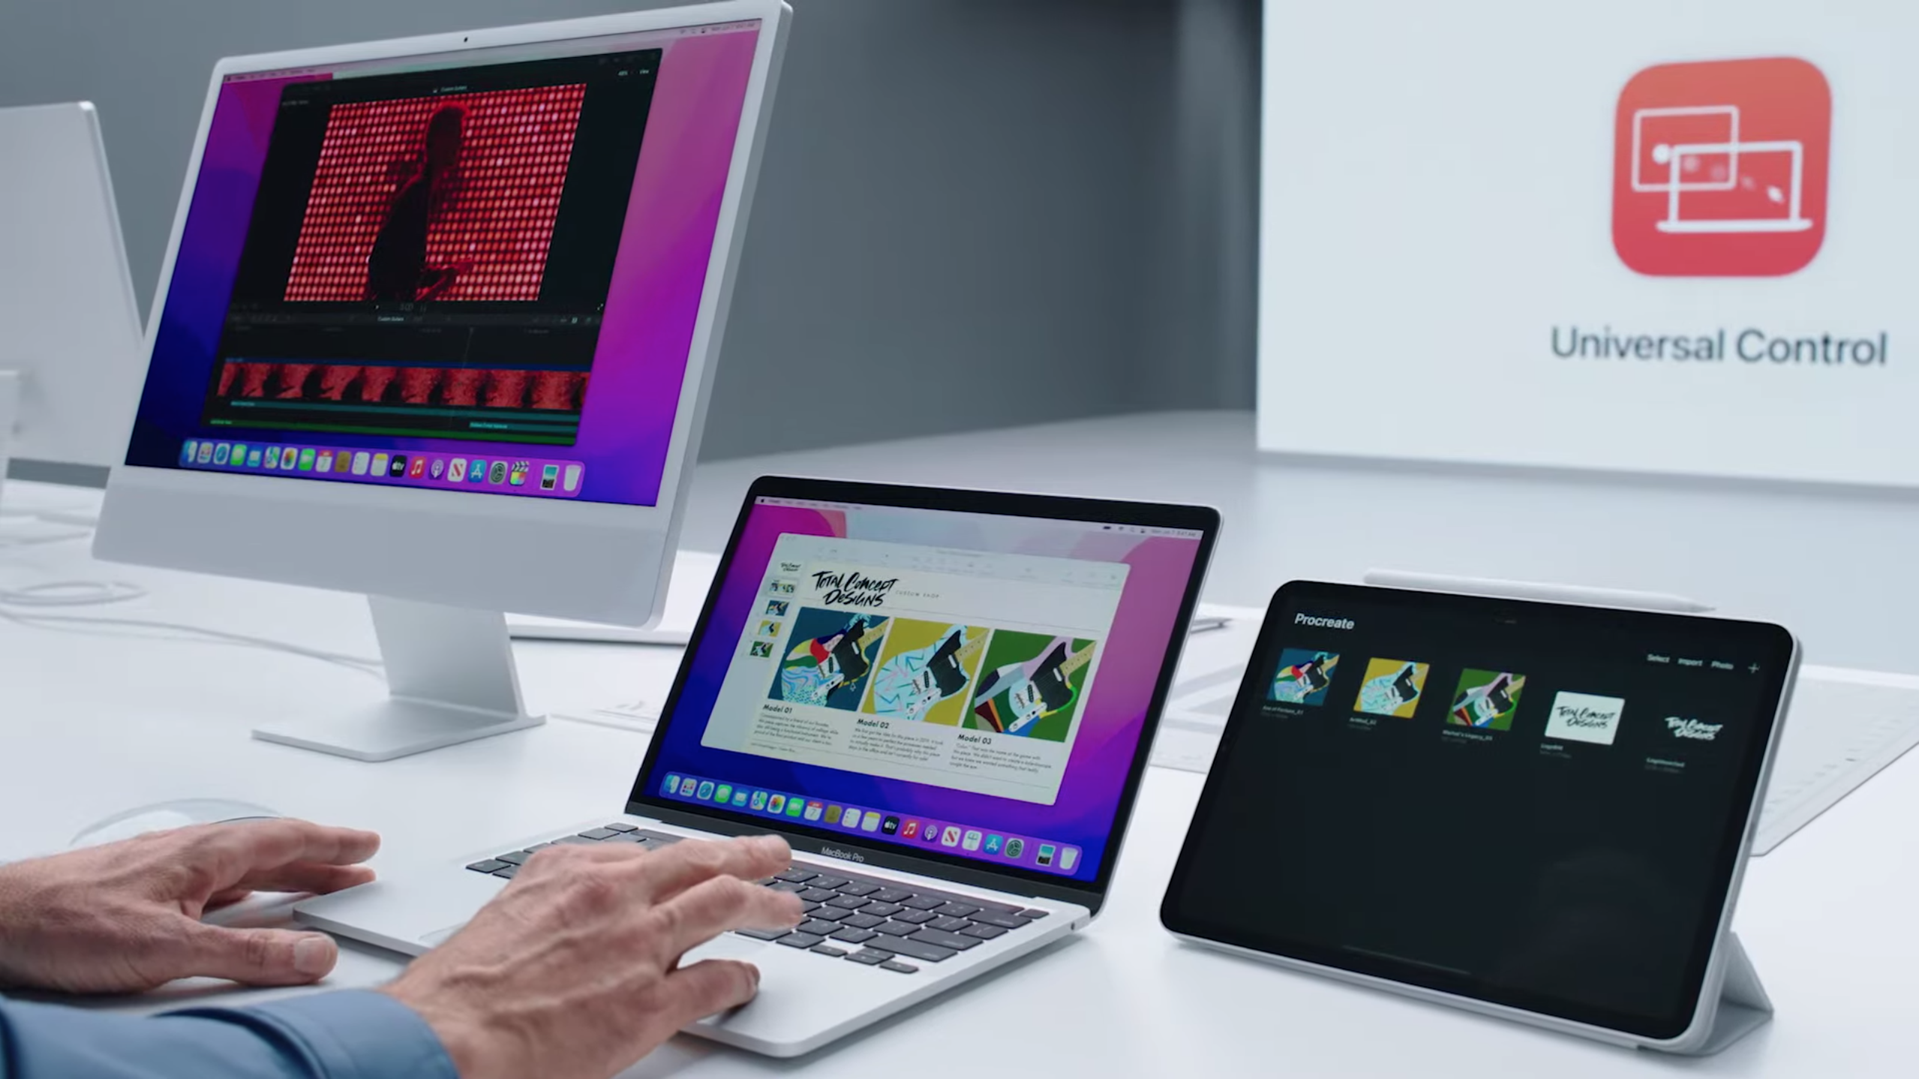 Combine Macbook and iPads Into a Shared Desktop with macOS Monterey